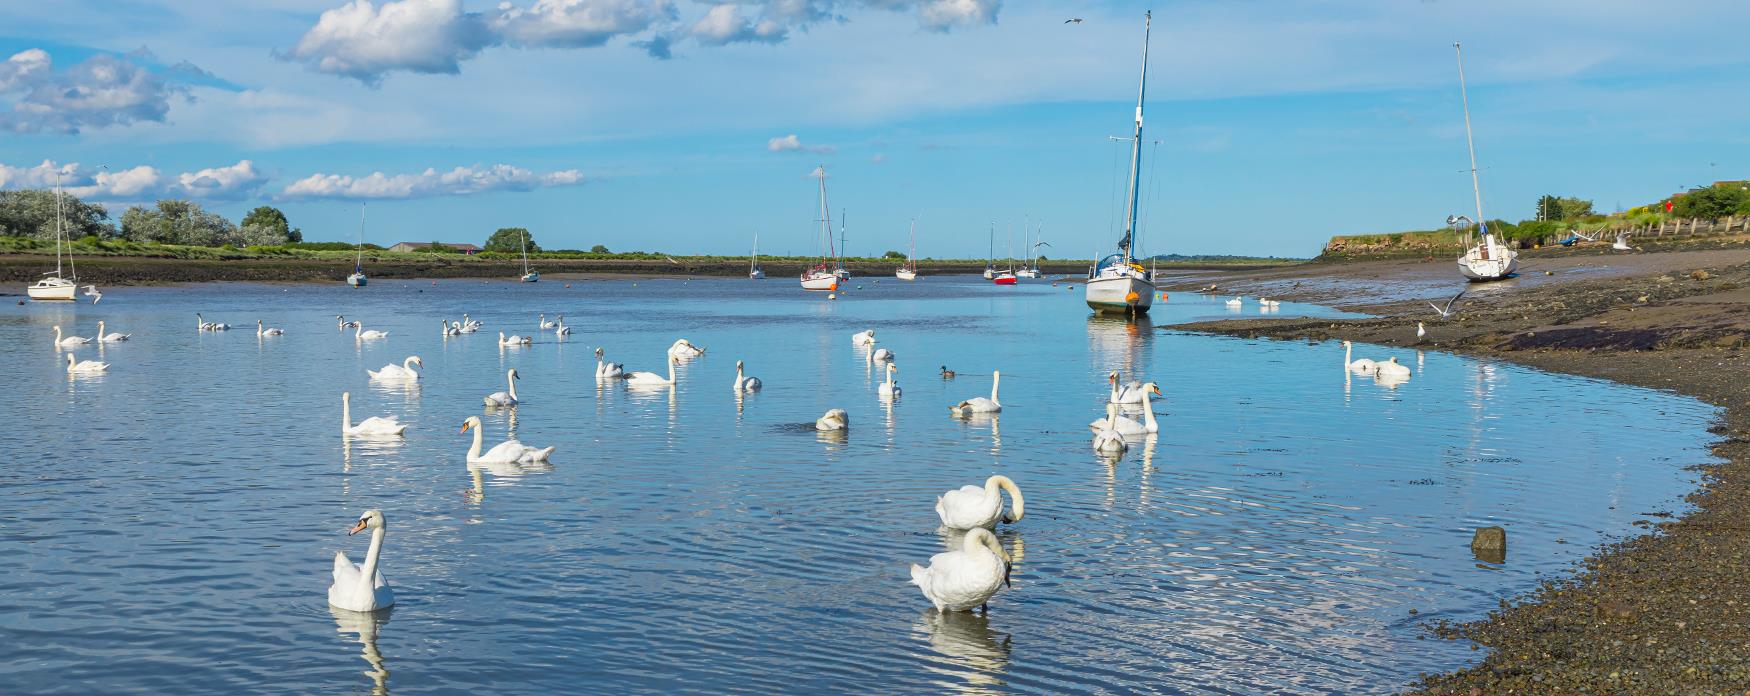 The swans in the water at Hullbridge